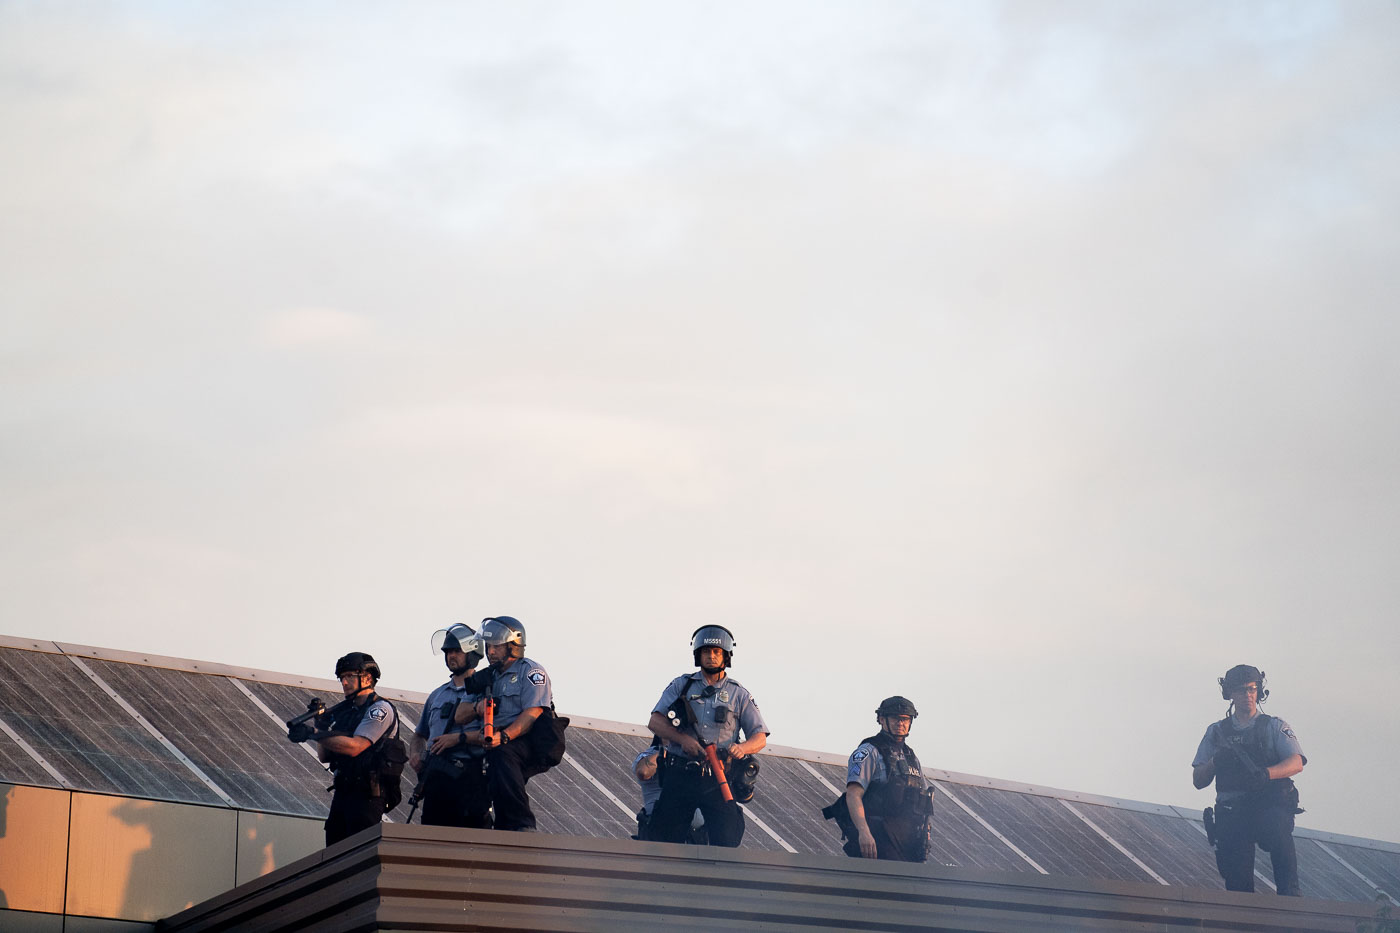 Minneapolis police look down on protesters from roof